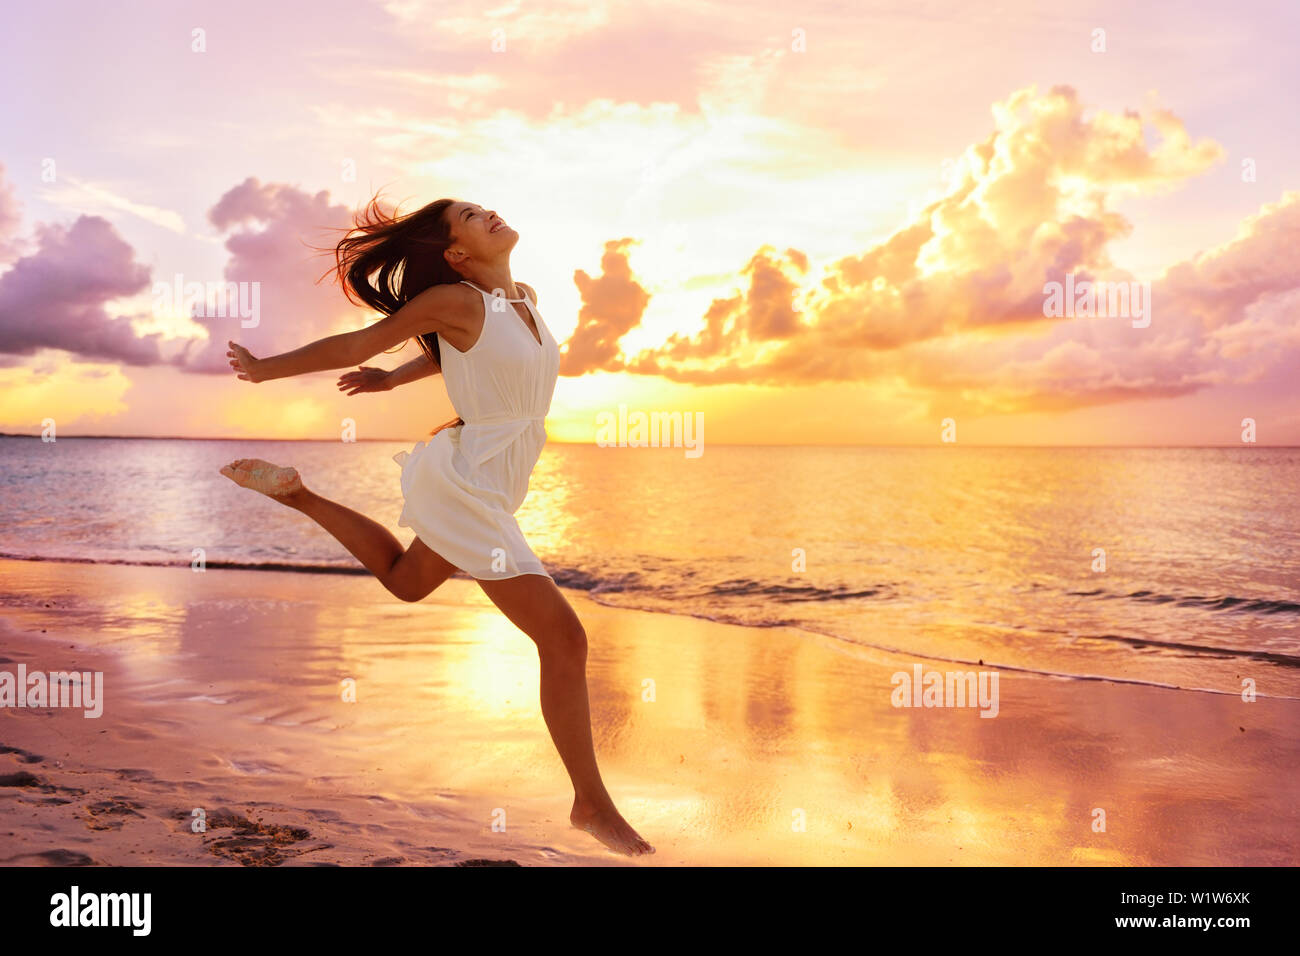 Freedom wellness well-being happiness concept. Happy carefree Asian woman feeling blissful jumping of joy on peaceful beach at sunset. Serenity, relaxation, mindfulness, stress free concepts. Stock Photo